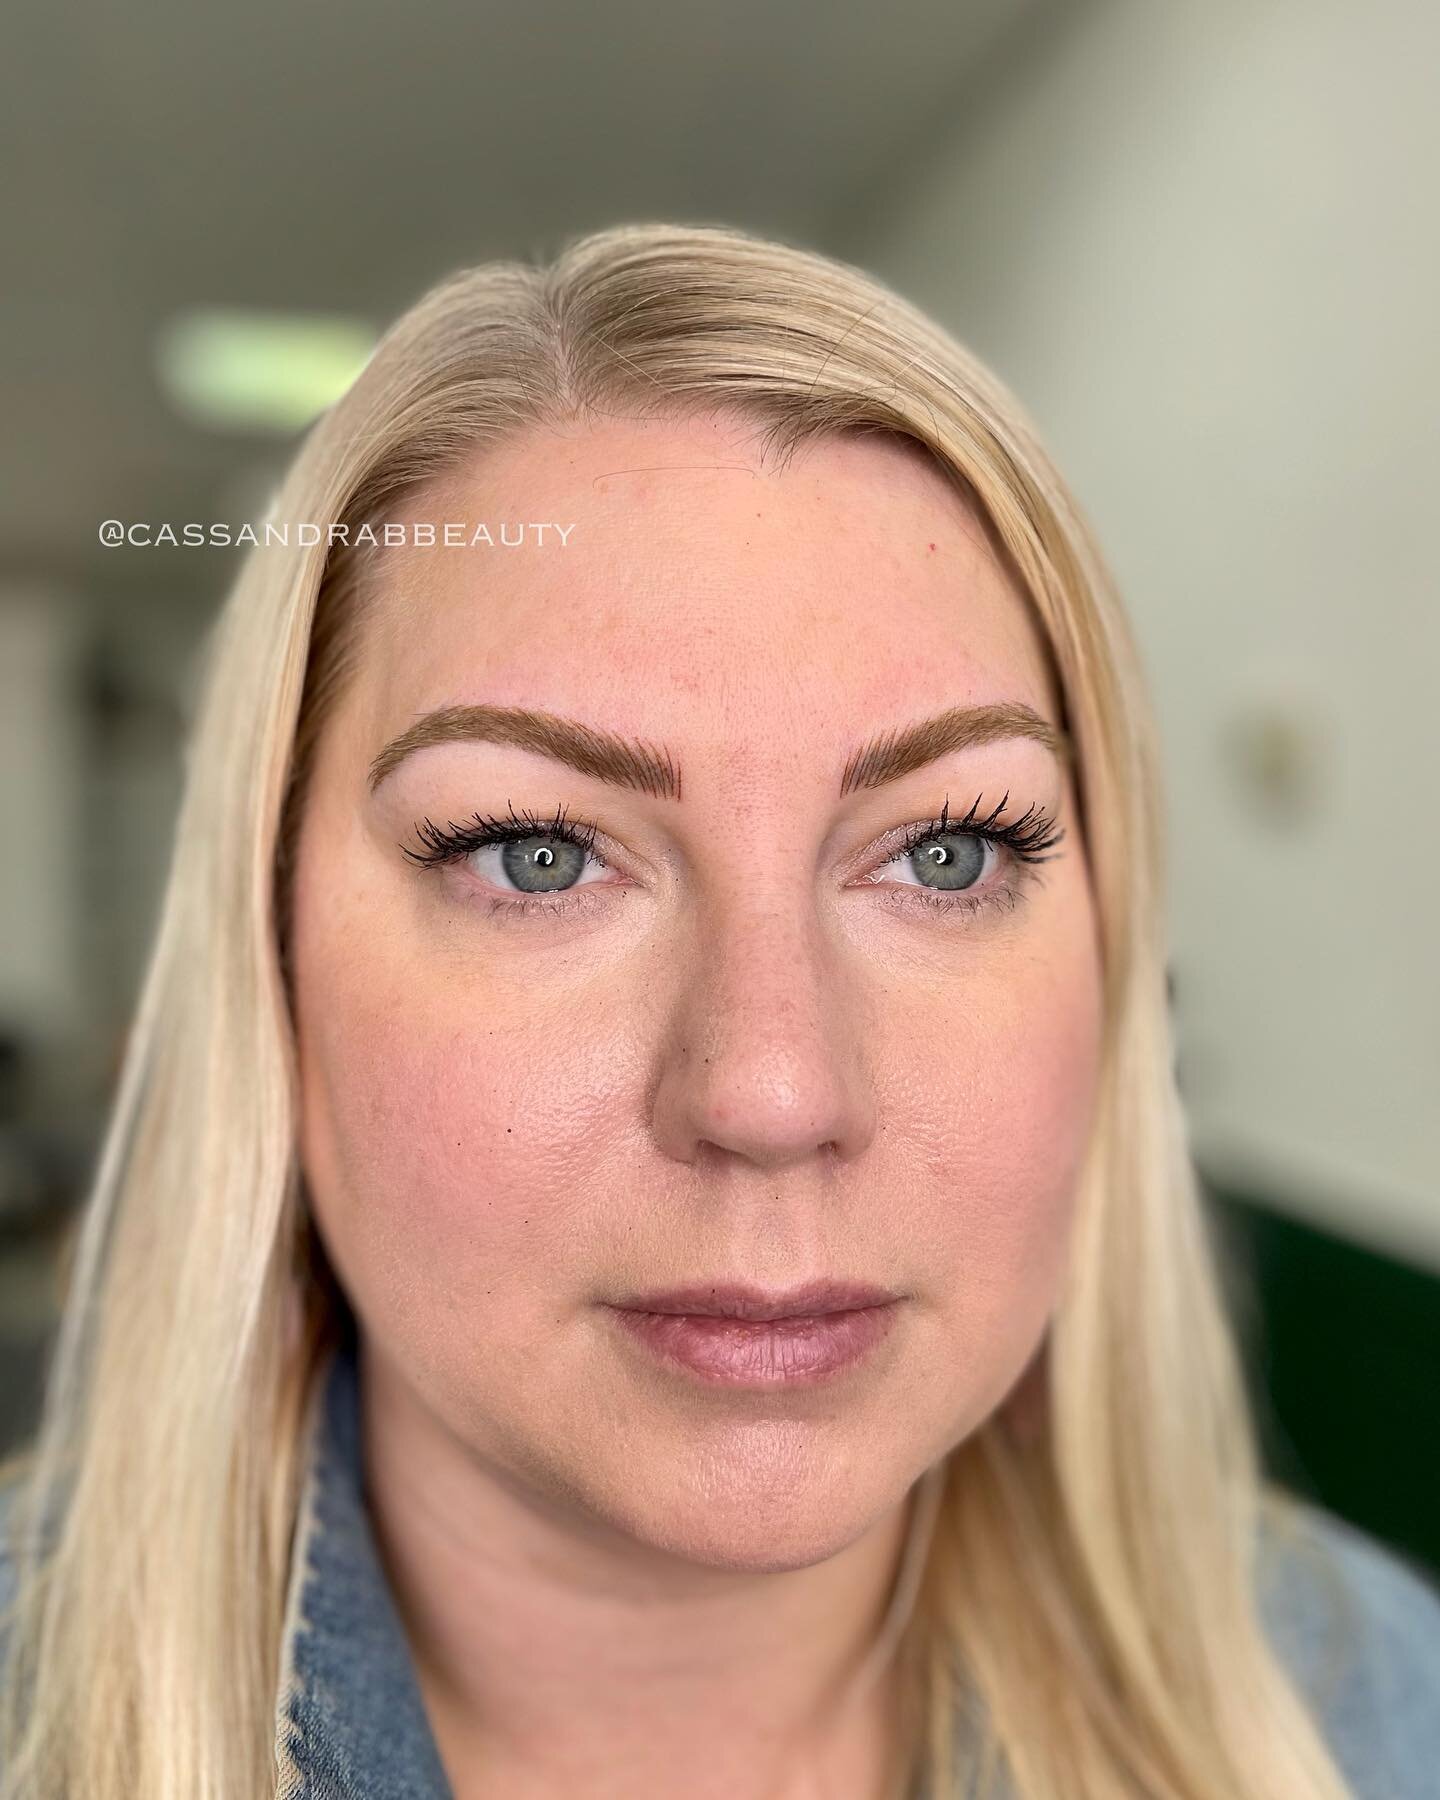 ✨NANO✨ at her annual touch up!

This client has had microblading done in the previous years but was a better candidate for Nano and wanted to make the switch! I love having a more versatile skill set to offer my clients! 🤗
.
.
.
.
#Langleybrows #sur